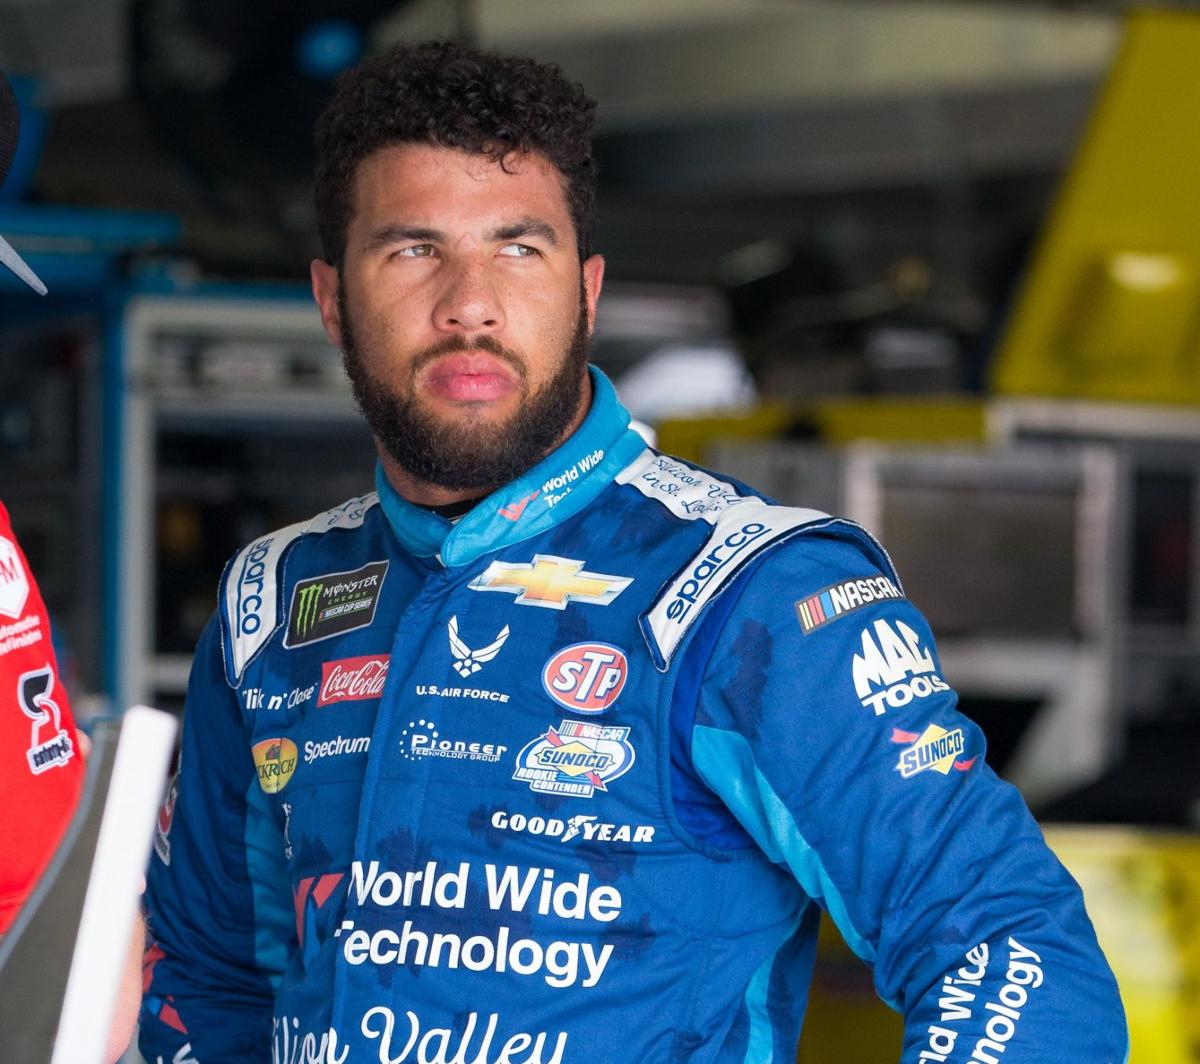 HUTTON: Northwest Cabarrus High's Bubba Wallace is simply enjoying his  rookie-season ride